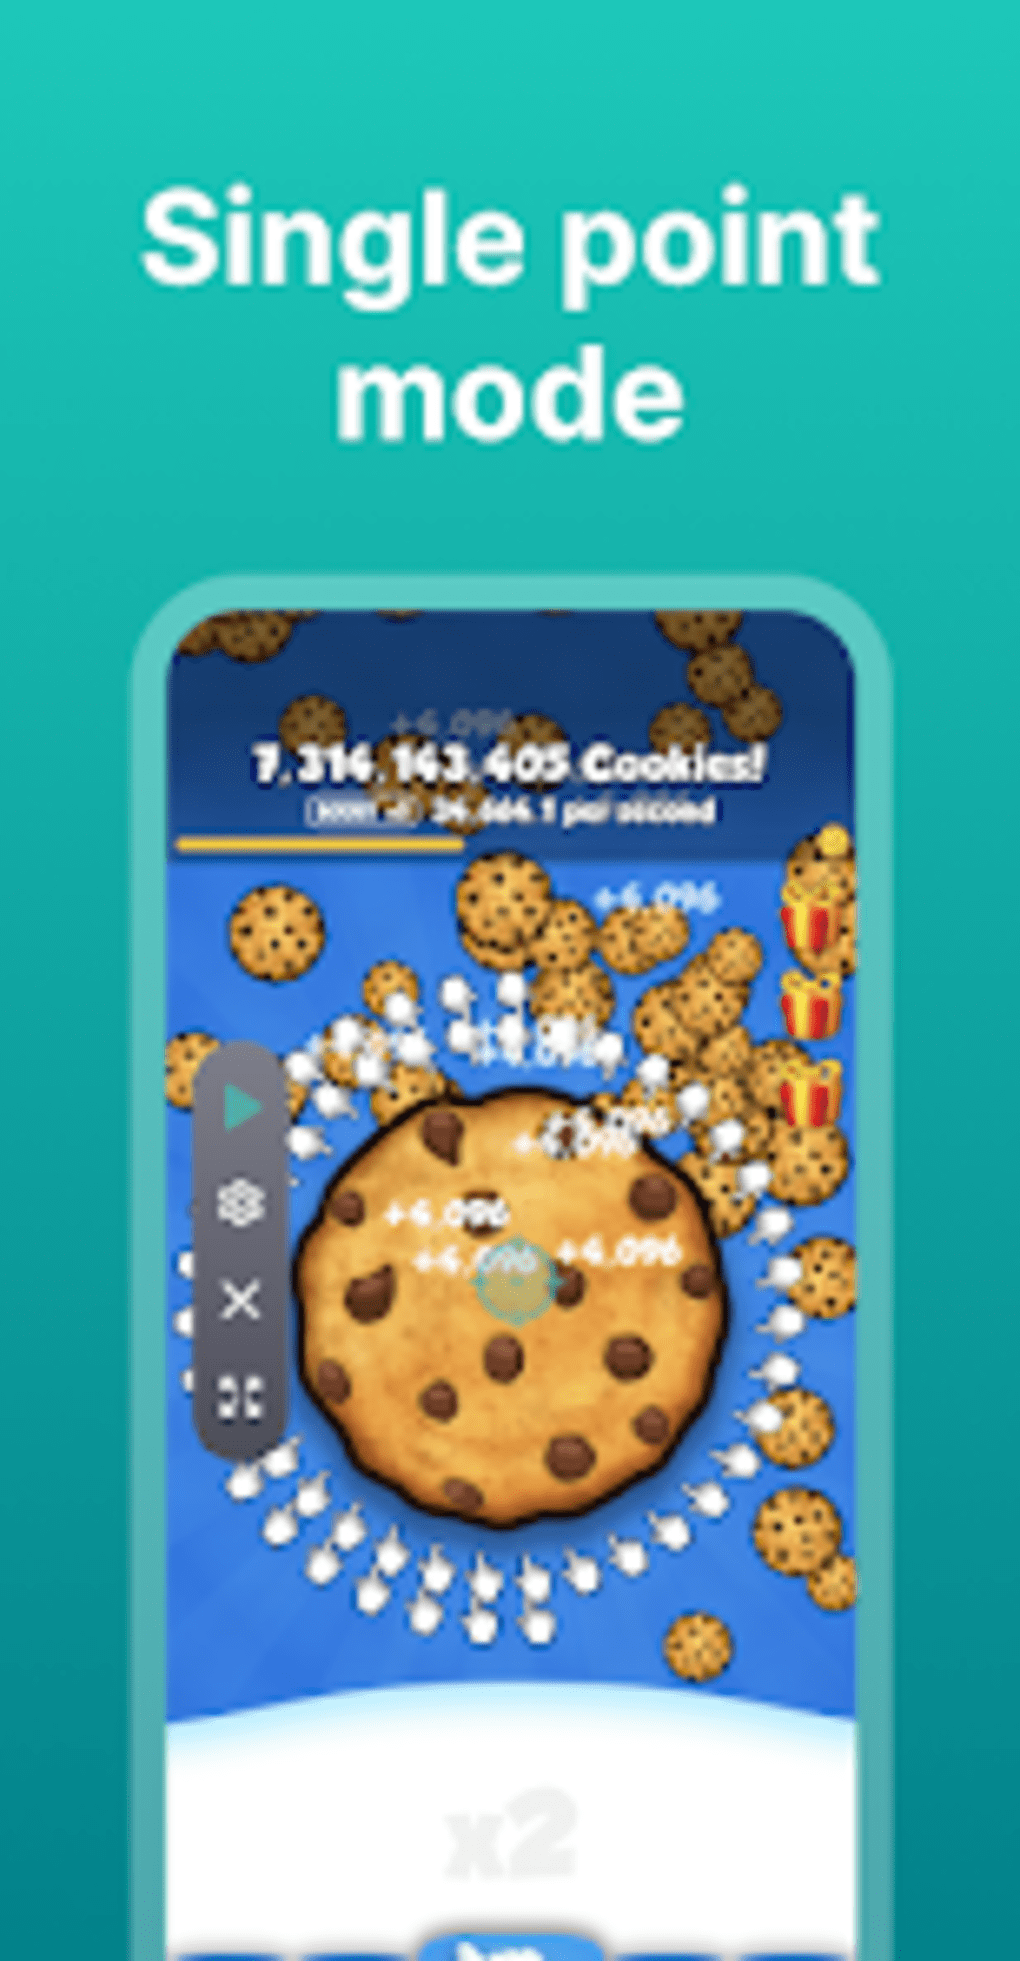 How to Get an Auto Clicker in Cookie Clicker